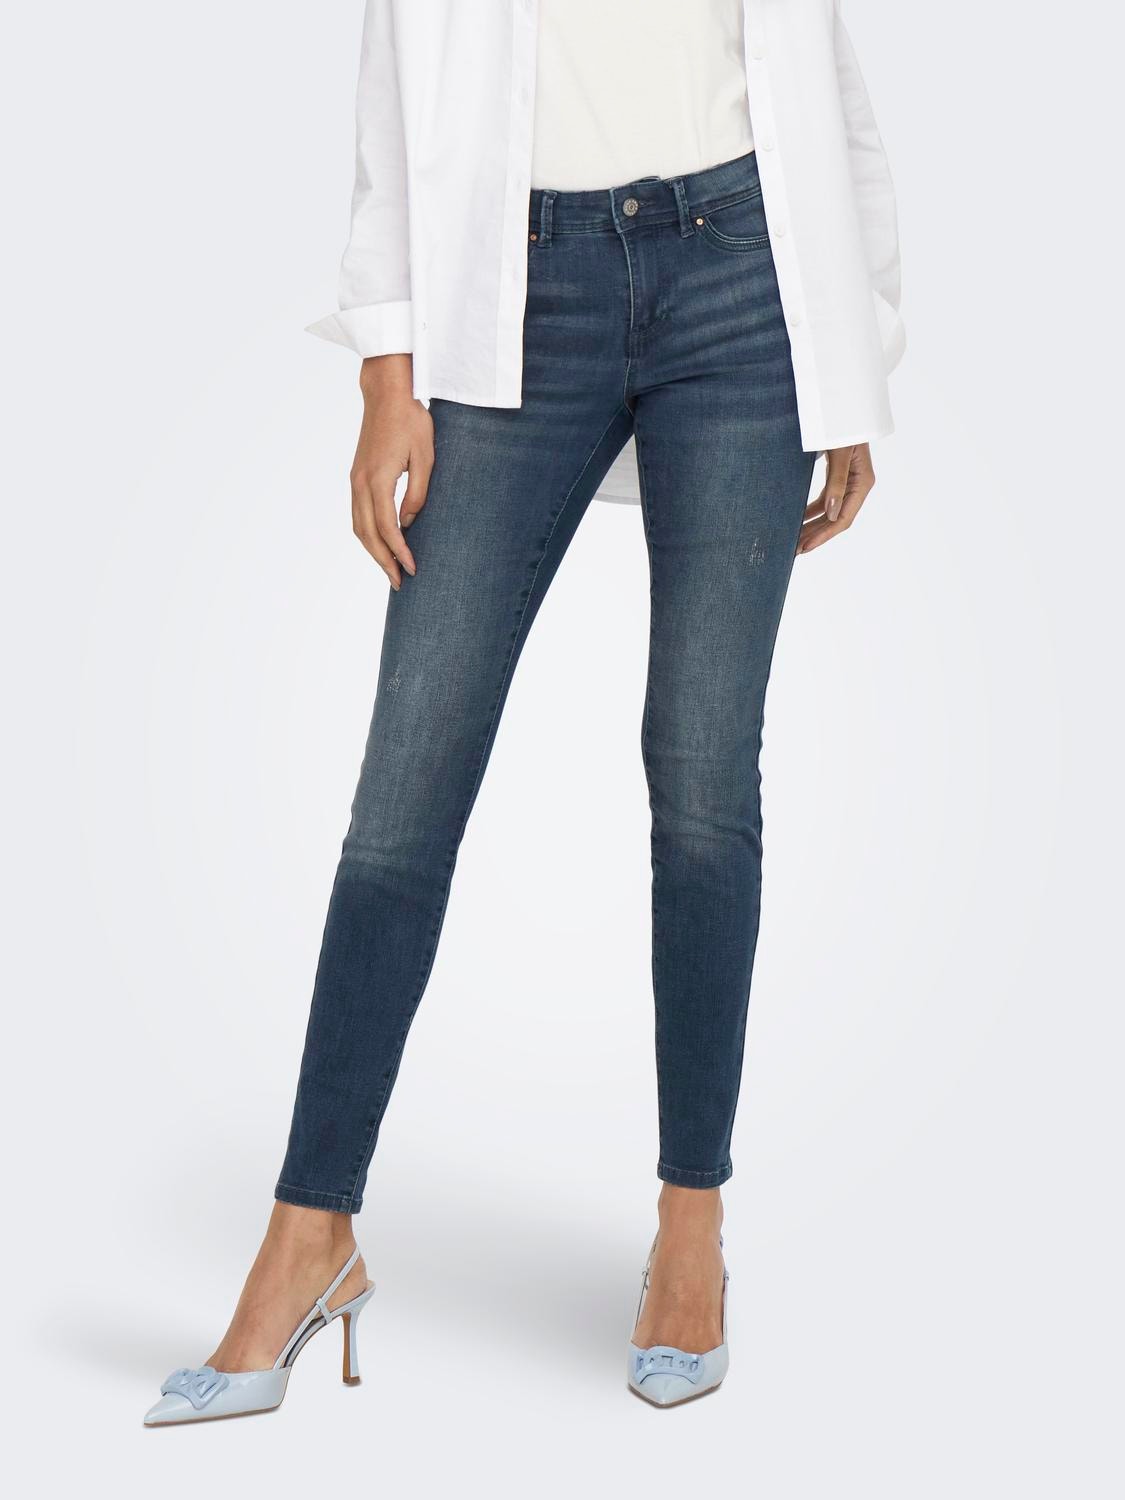 ONLY Jeans Skinny Fit Taille moyenne -Blue Black Denim - 15233288